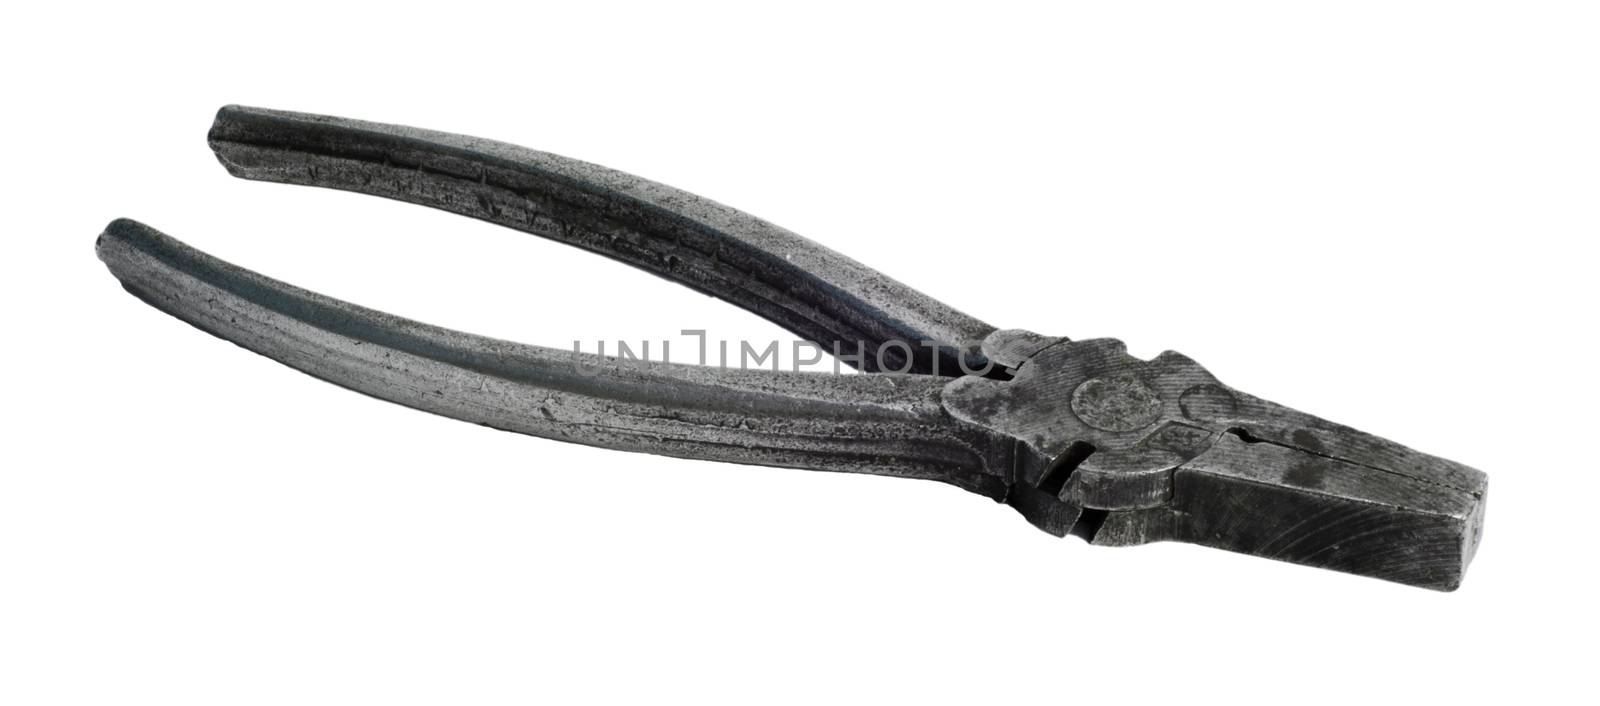 Vintage tool, flat-nose pliers made in the USSR in 1950th years, isolated on white background